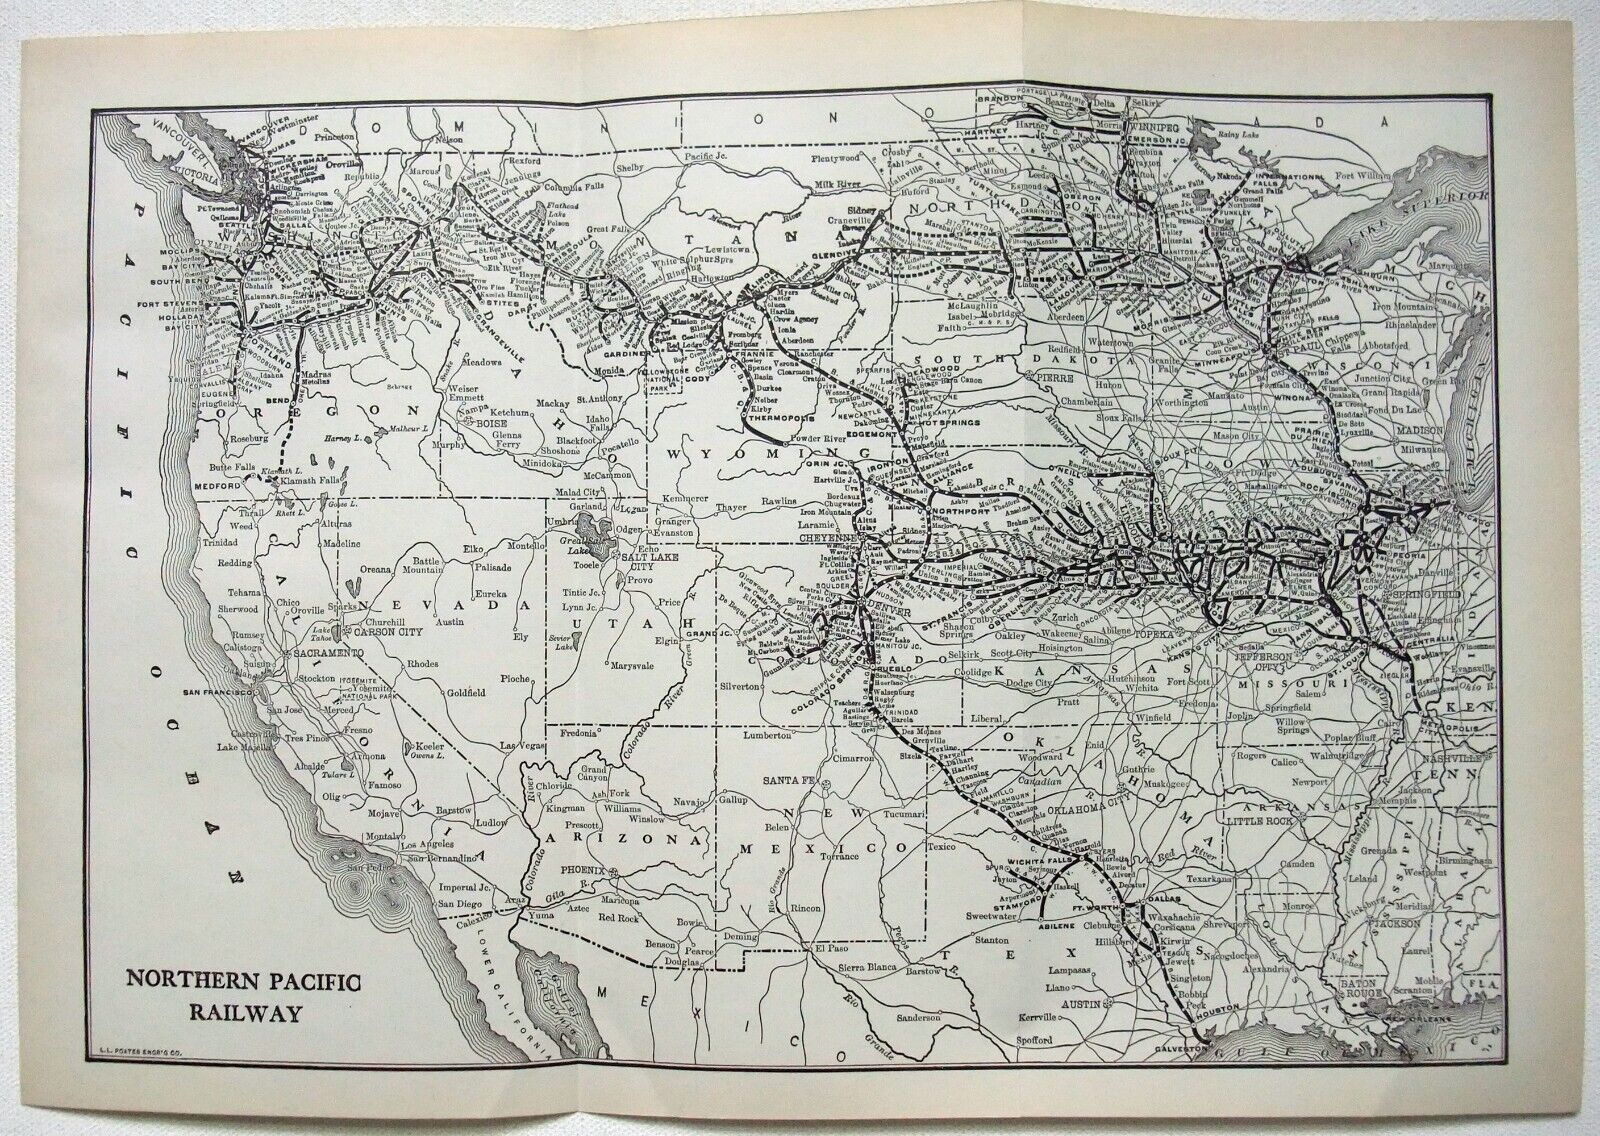 Northern Pacific Railway - Original 1914 System Map. Antique Railroad